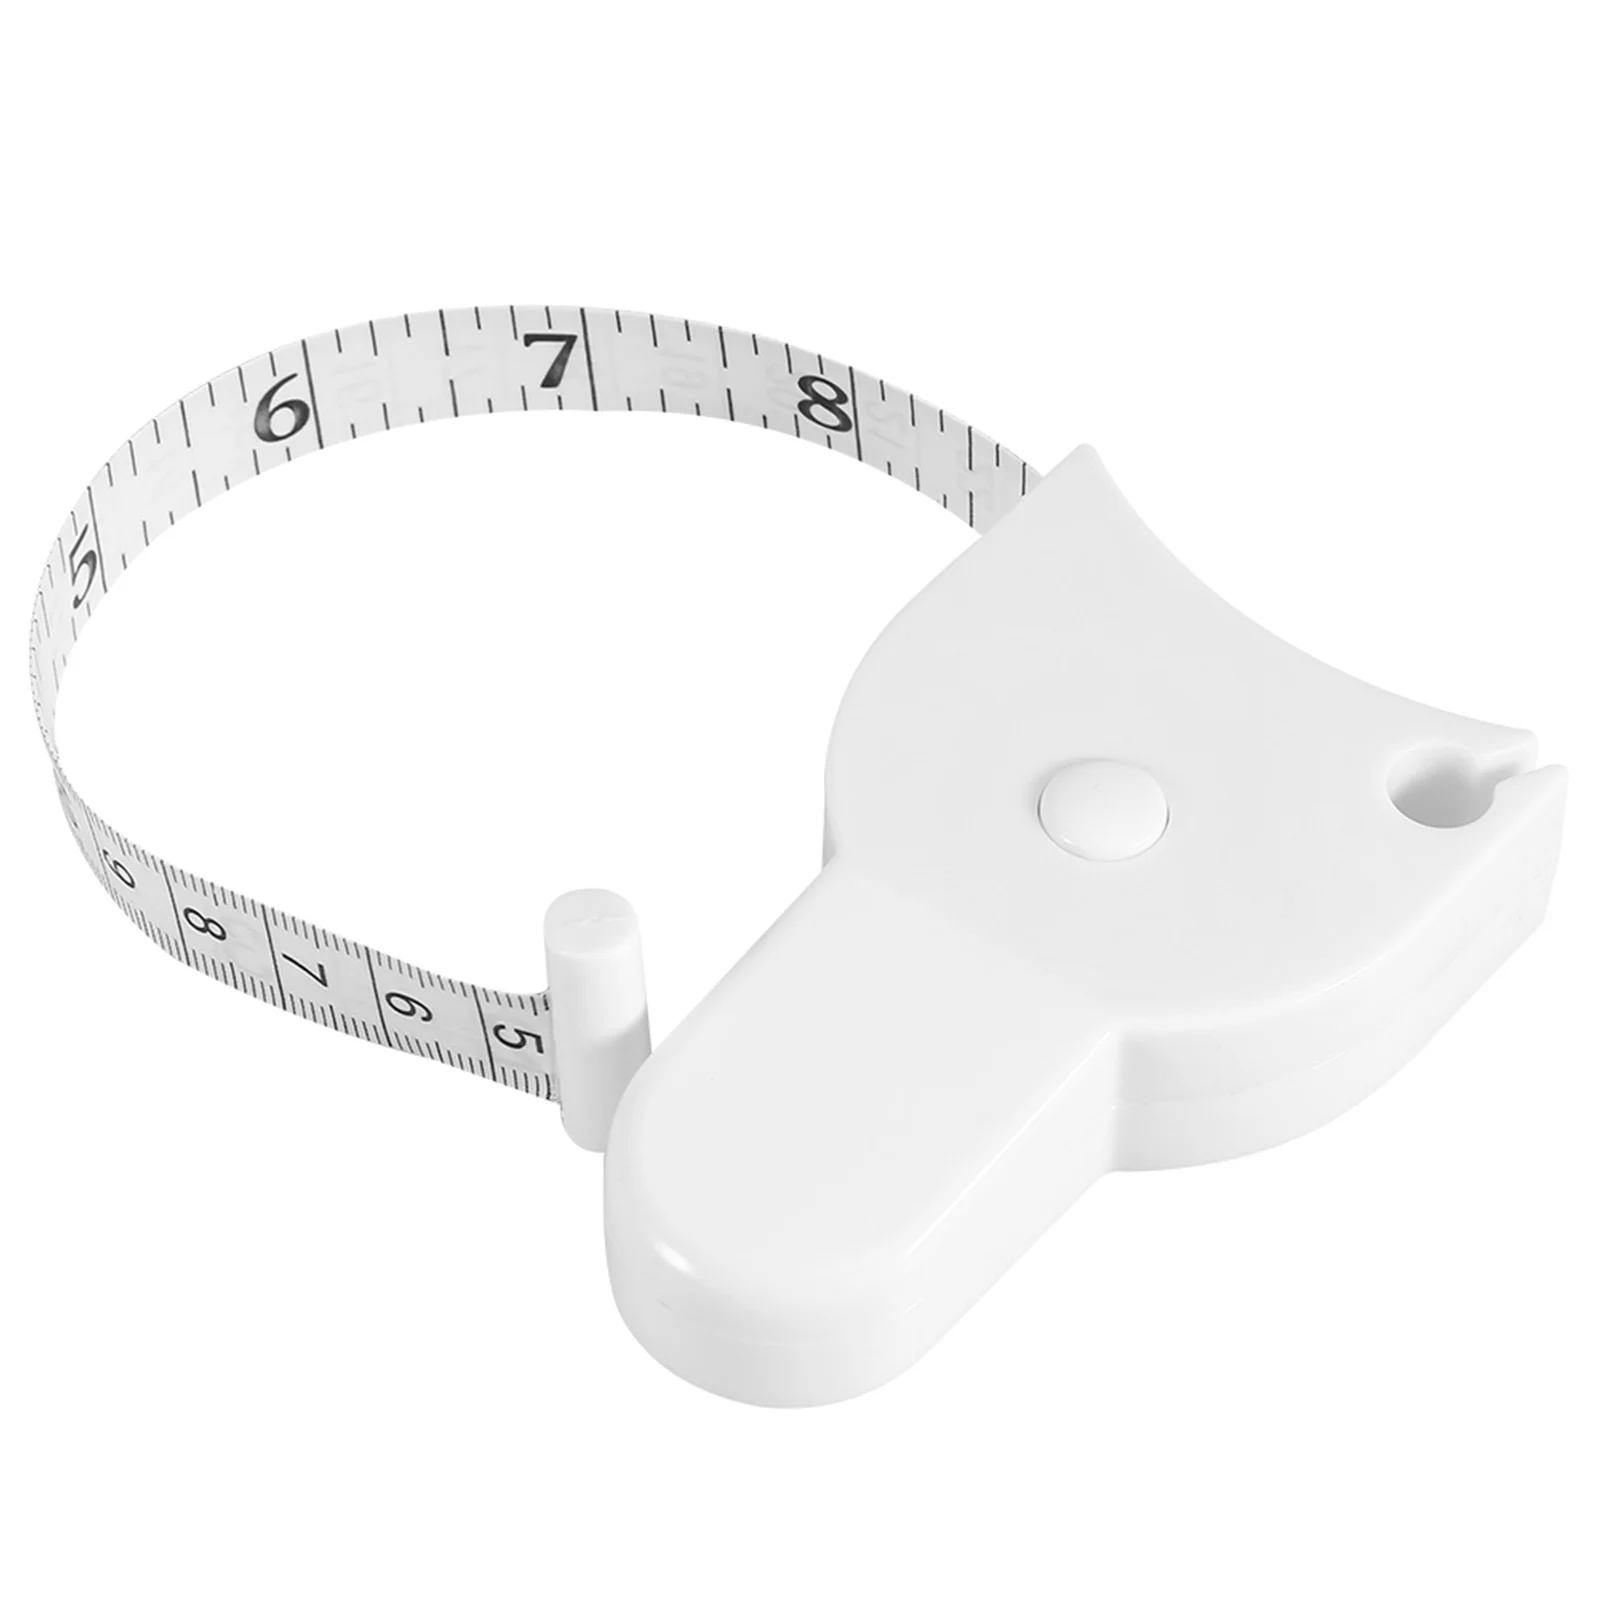 1.5M Soft Tape Measure Double Scale Body Sewing Flexible Measurement Ruler For Body Measuring Tools Retractable Ruler